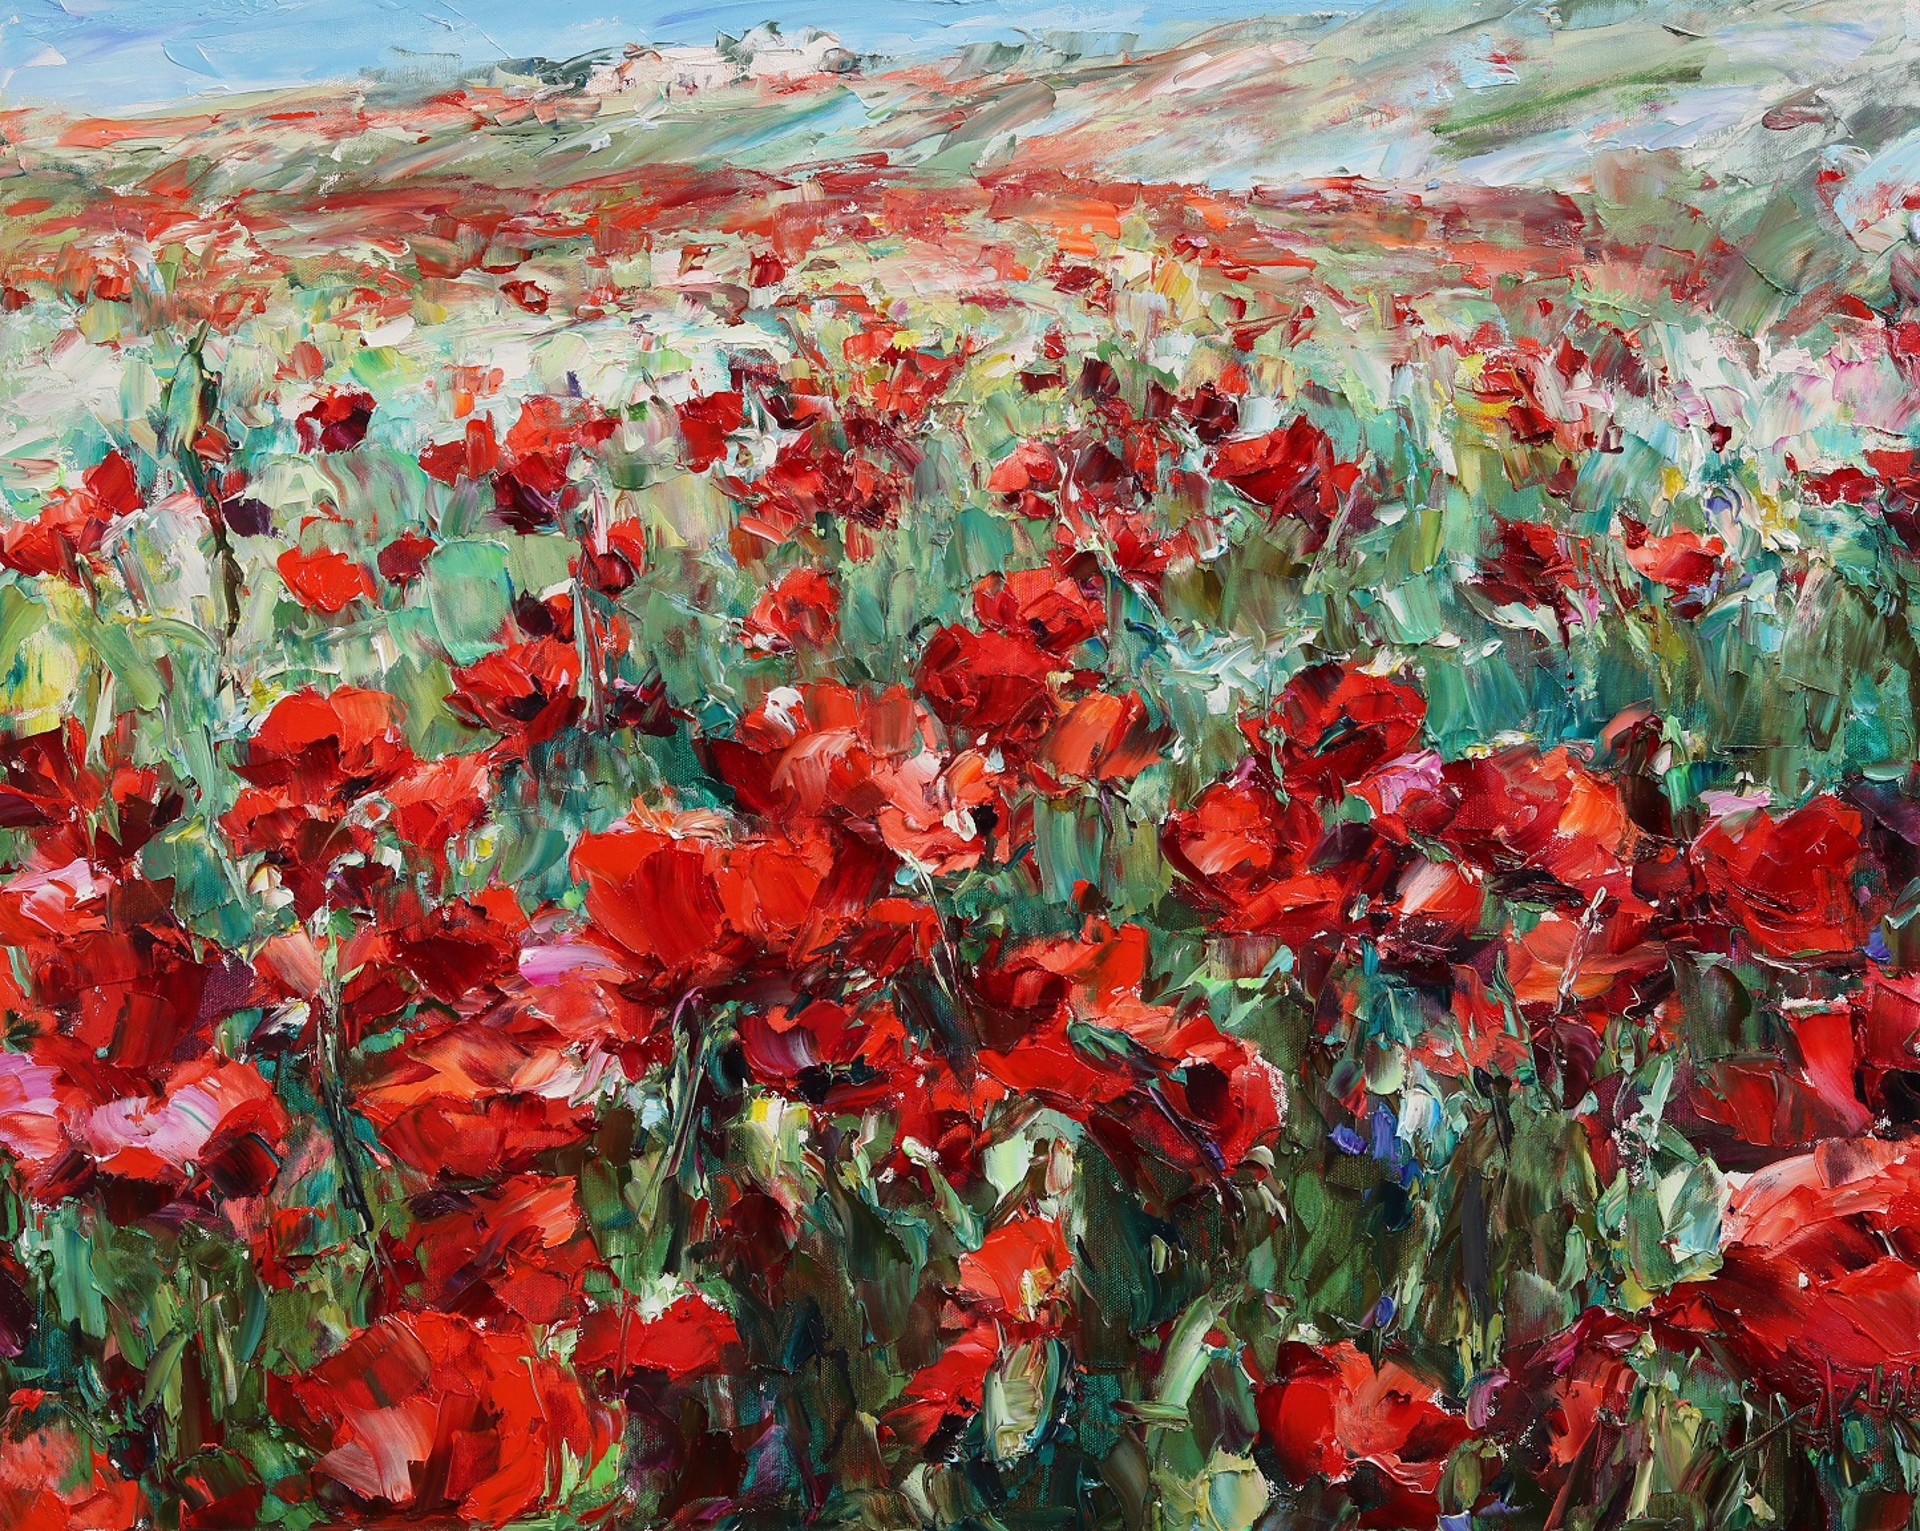 Fields of Tuscany (SOLD) by LYUDMILA AGRICH